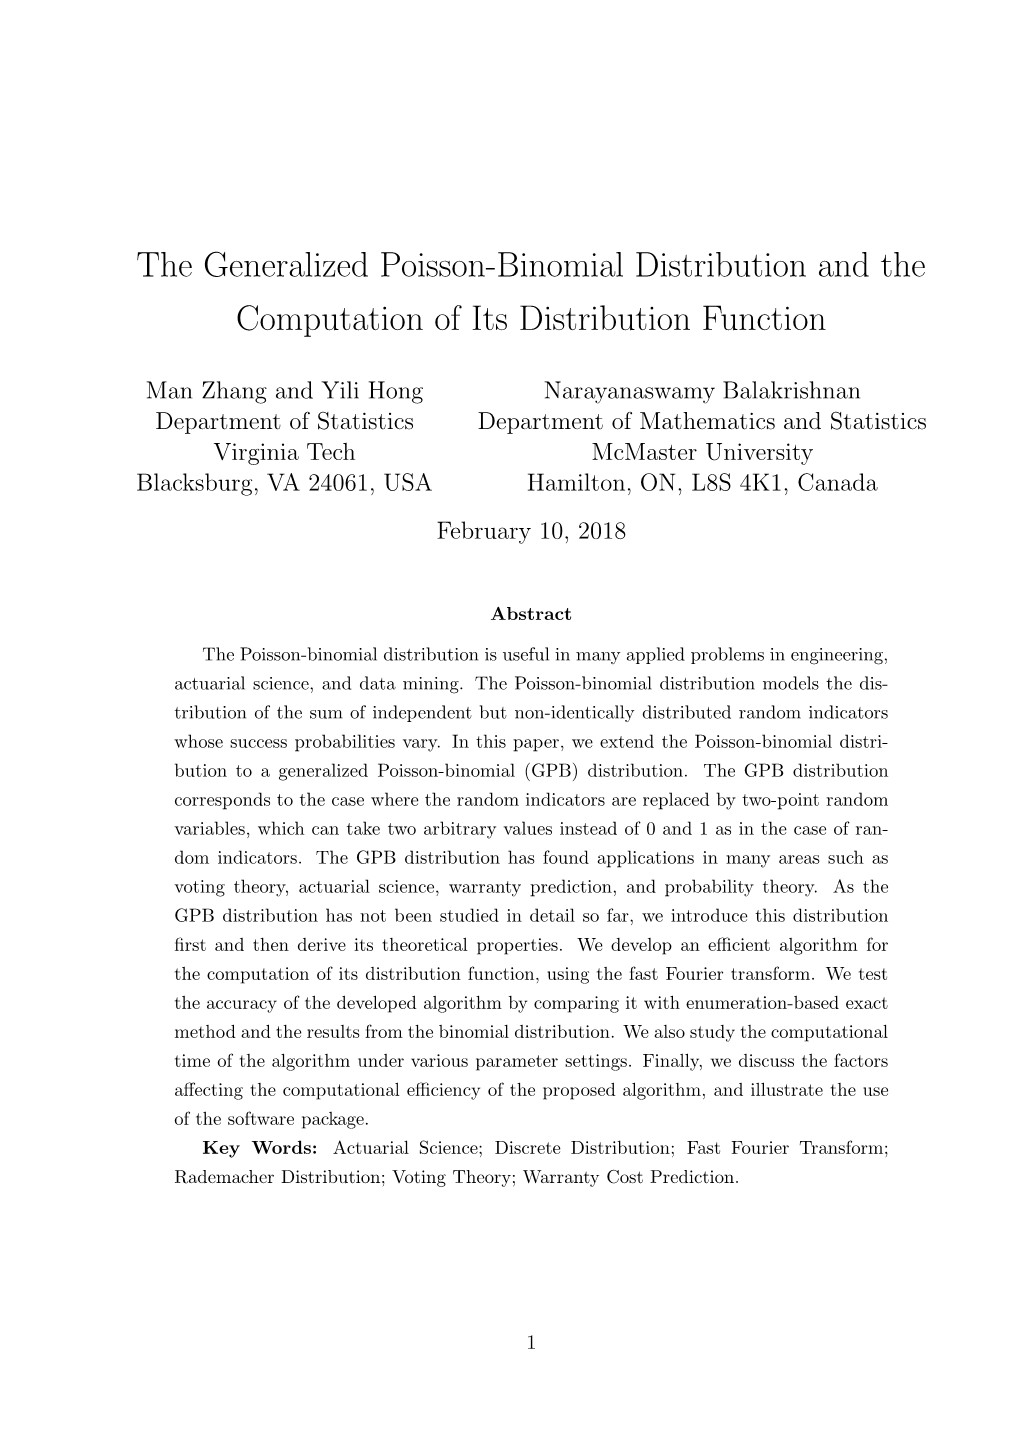 The Generalized Poisson-Binomial Distribution and the Computation of Its Distribution Function